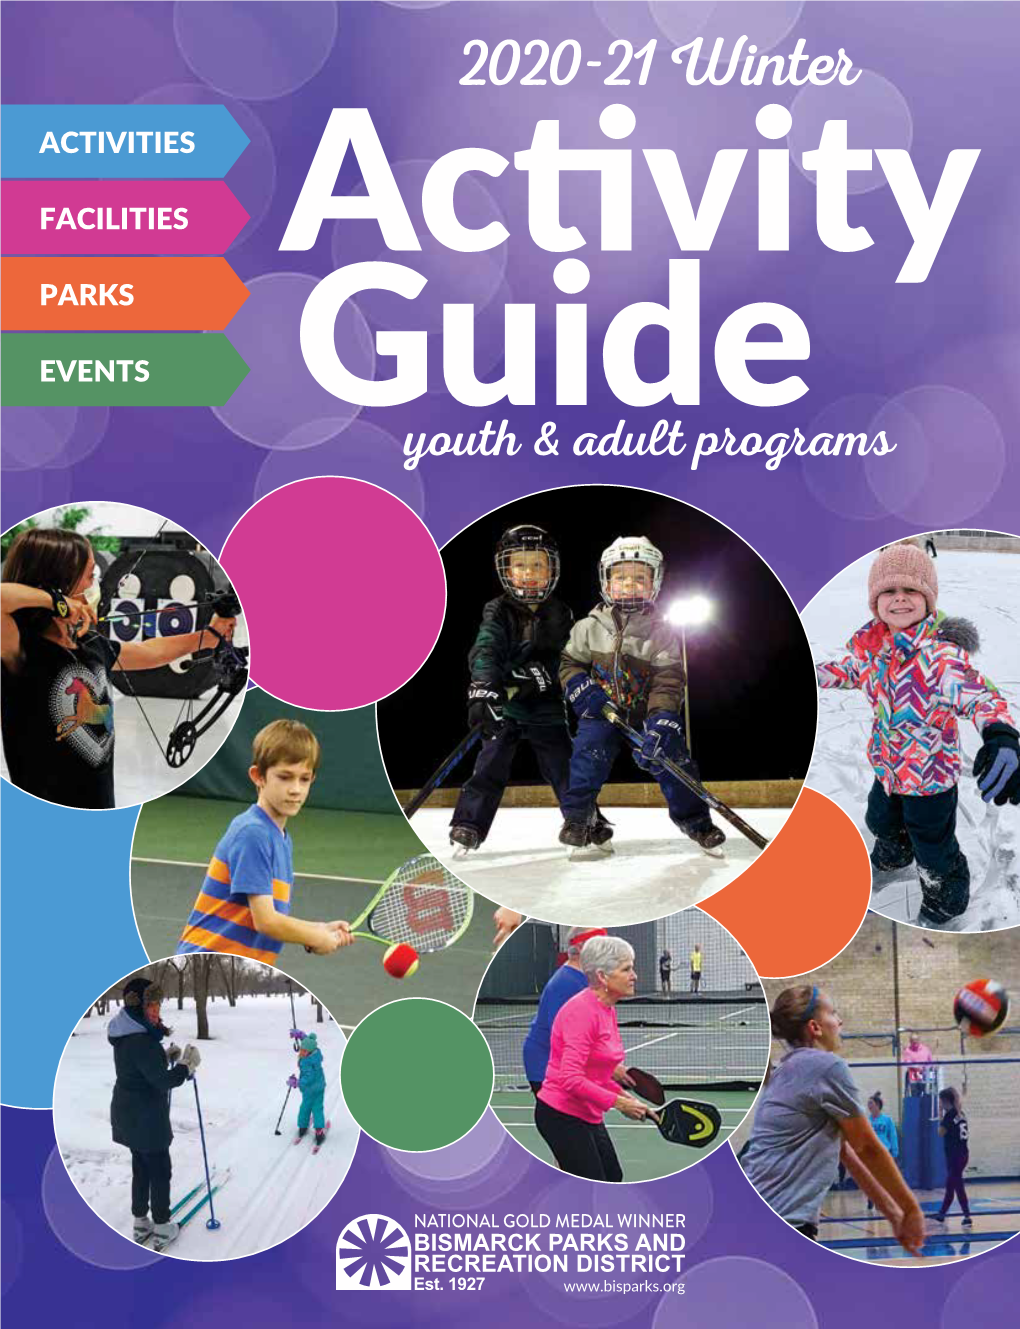 2020-21 Winter ACTIVITIES FACILITIES Activity PARKS EVENTS Guide Youth & Adult Programs